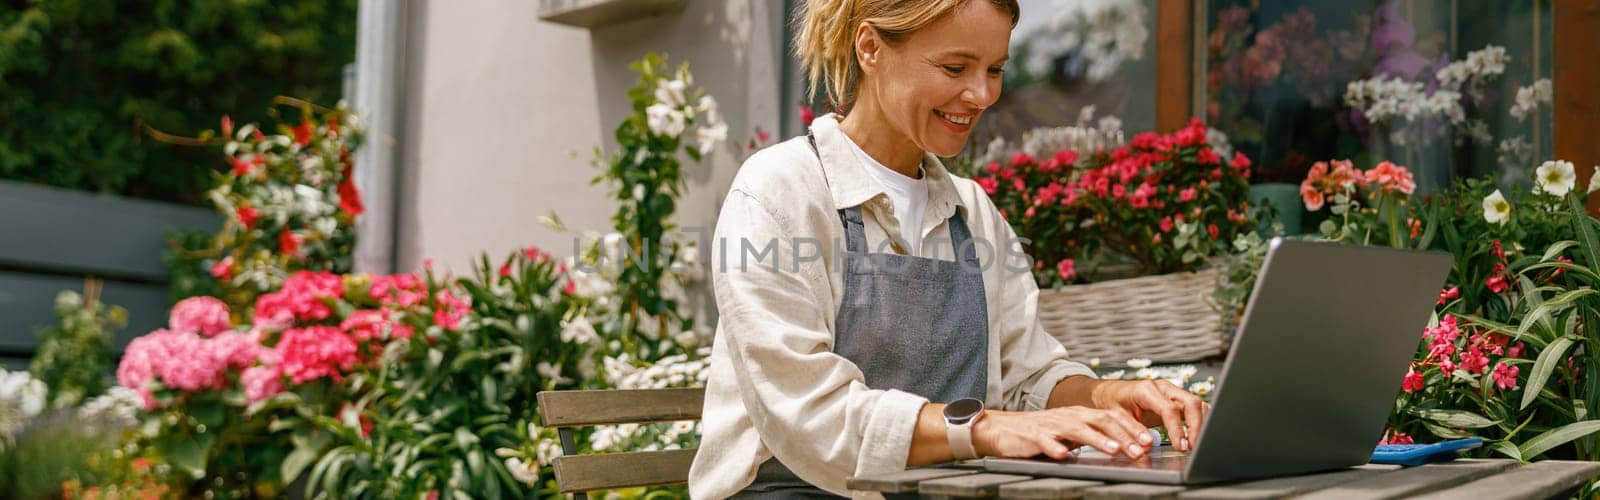 Small flower shop owner florist wearing apron working on laptop and taking online orders in store by Yaroslav_astakhov